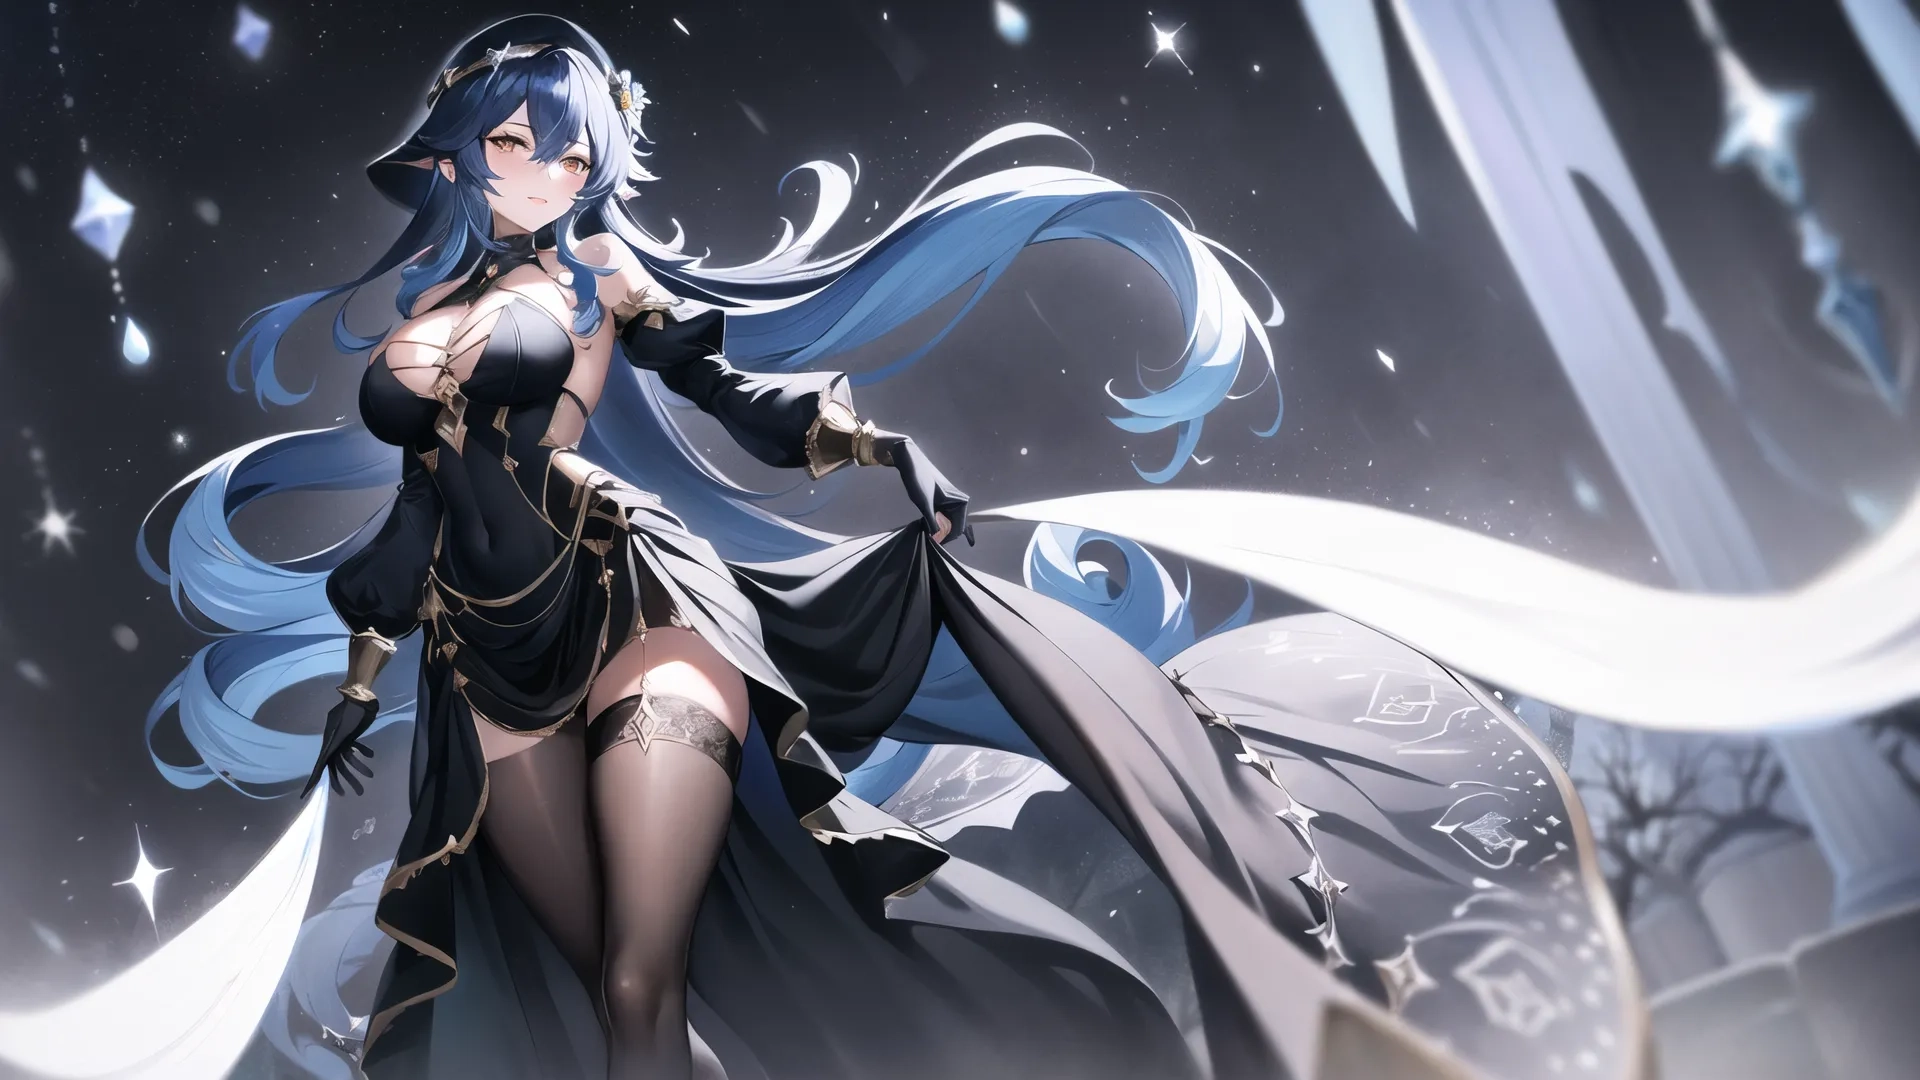 an animation image of she is wearing blue and black outfits for a game with long hair and long, flowing hair and a hood, holding a dagger in
